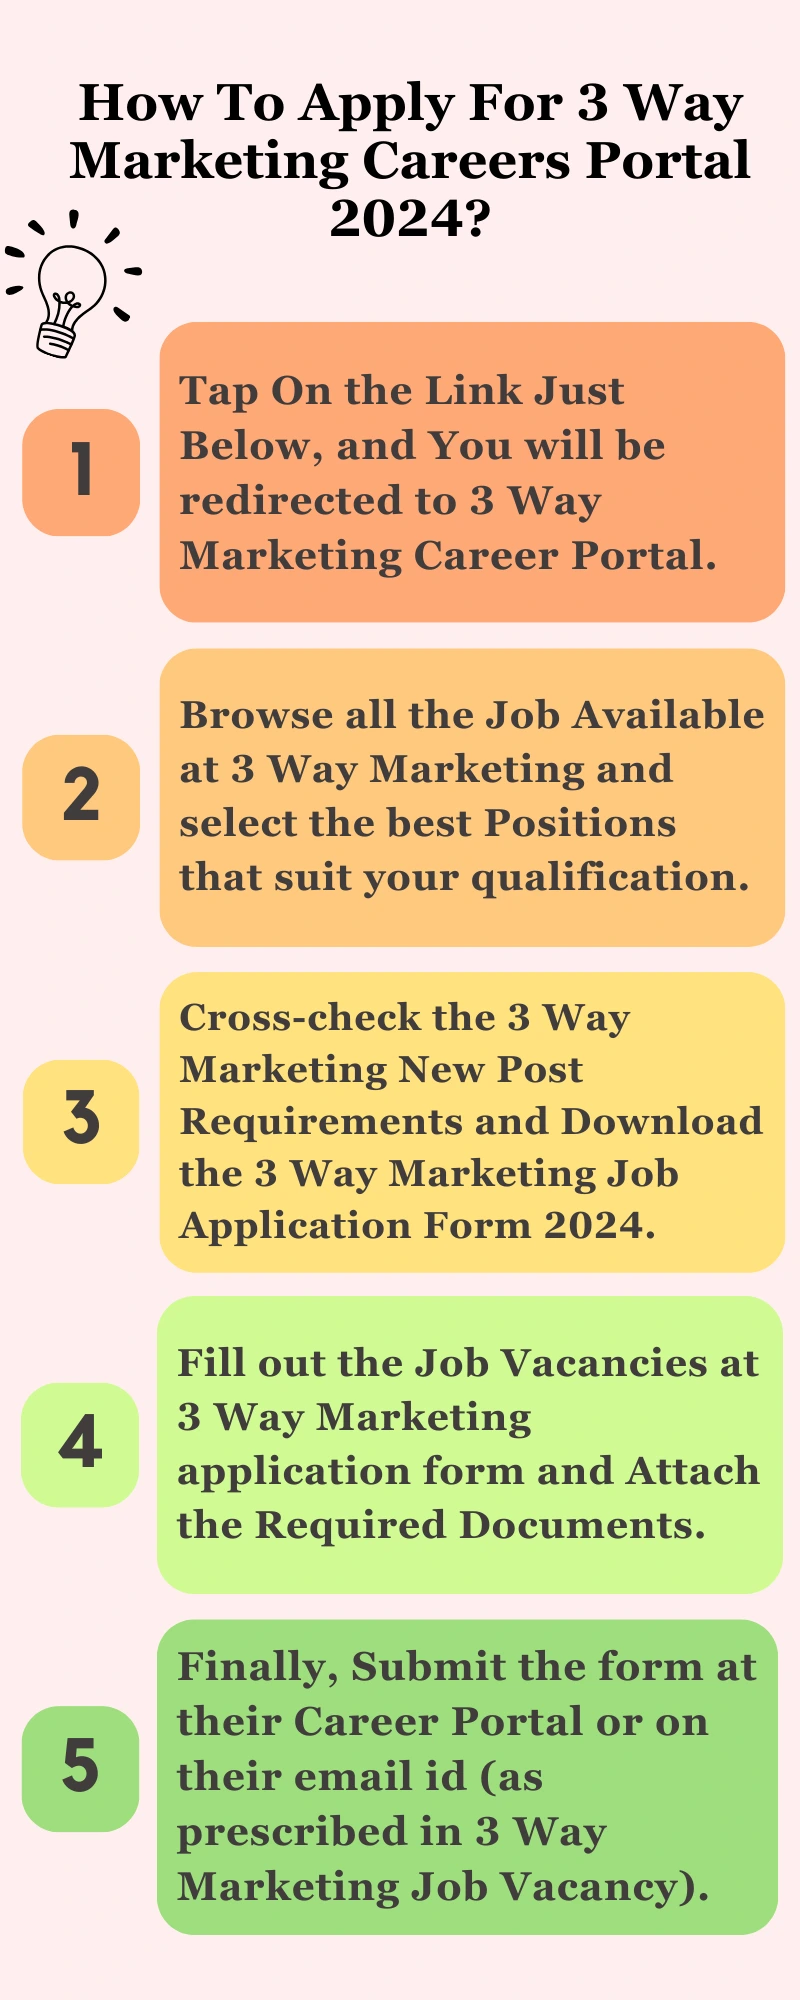 How To Apply For 3 Way Marketing Careers Portal 2024?